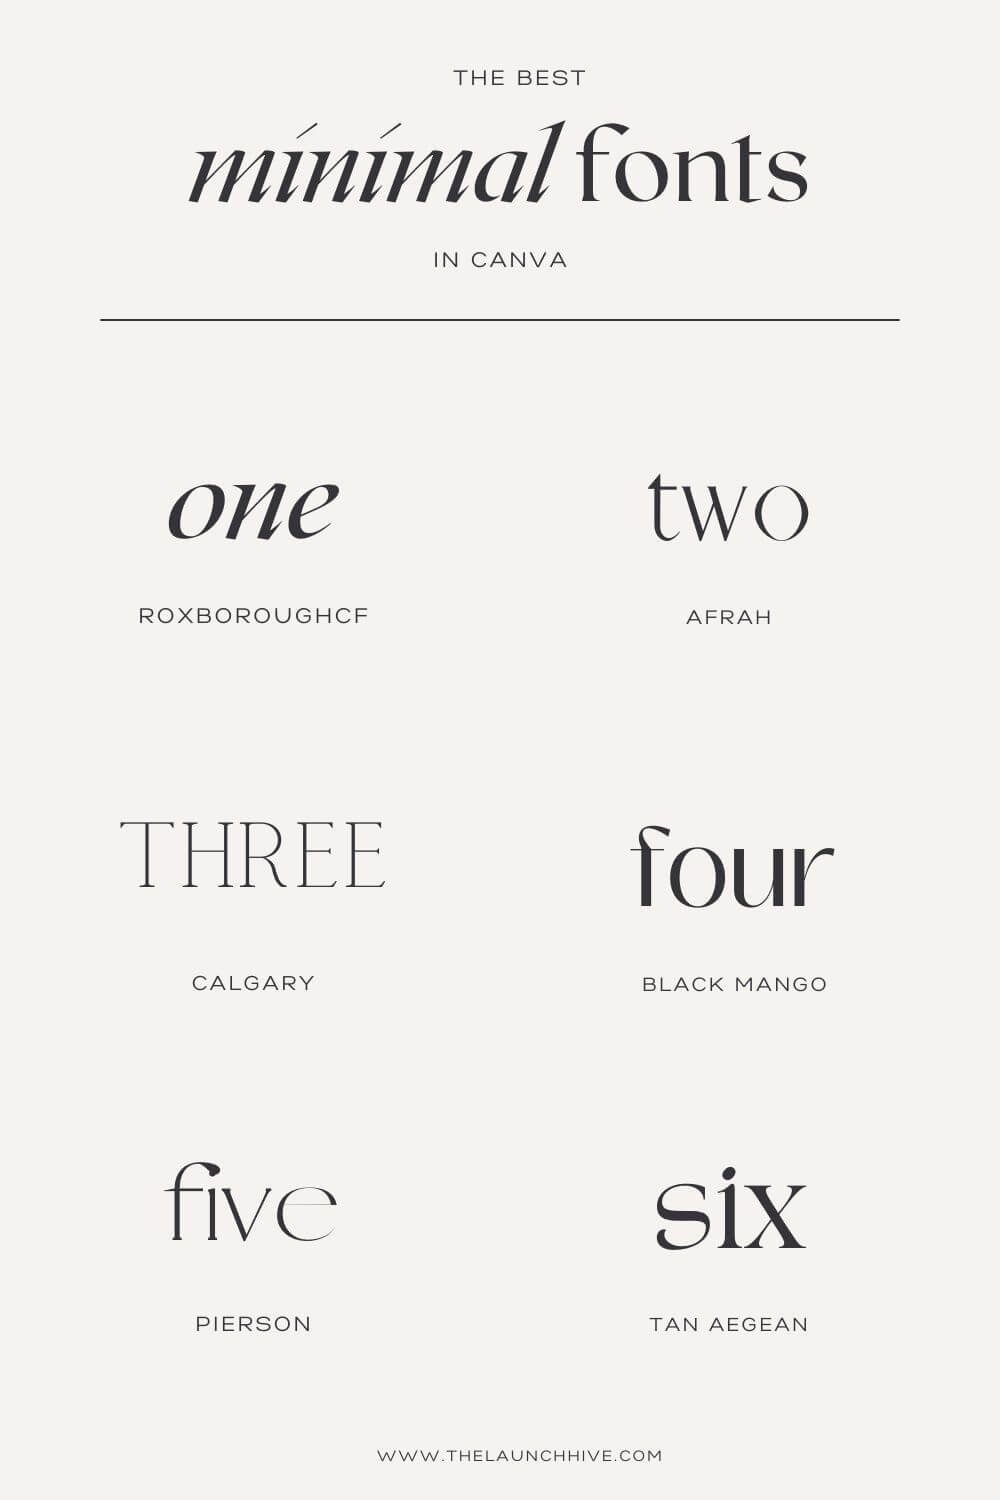 Top 7 Minimal Fonts In Canva — The Launch Hive